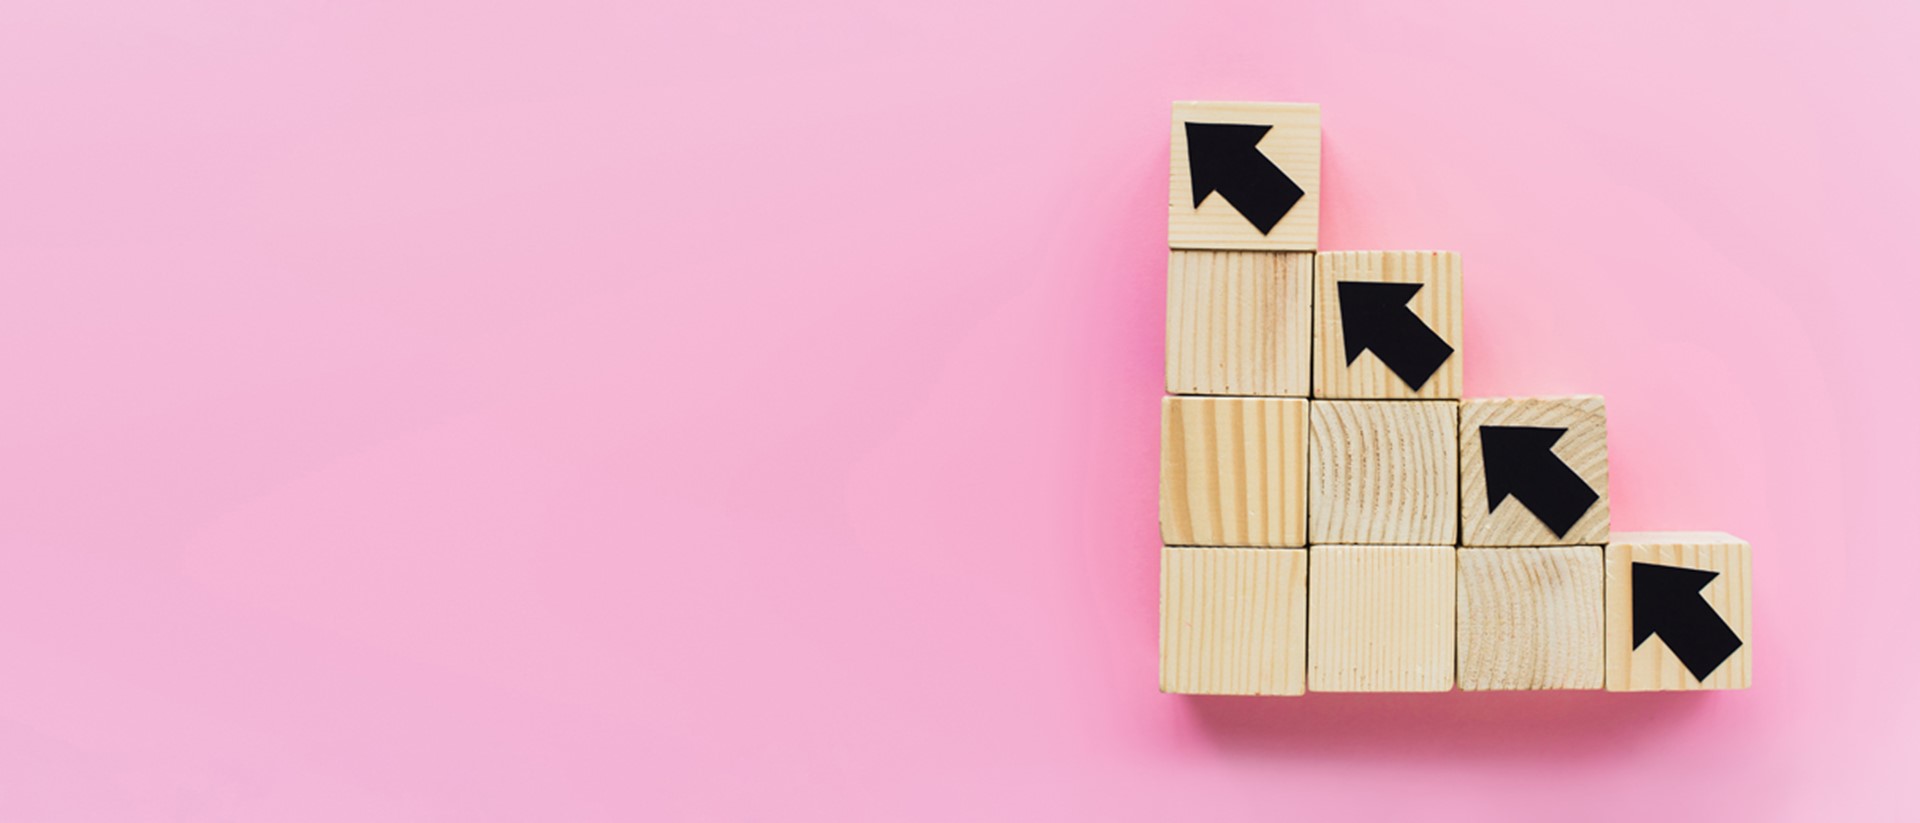 Image of wooden blocks going diagonally against a pink background